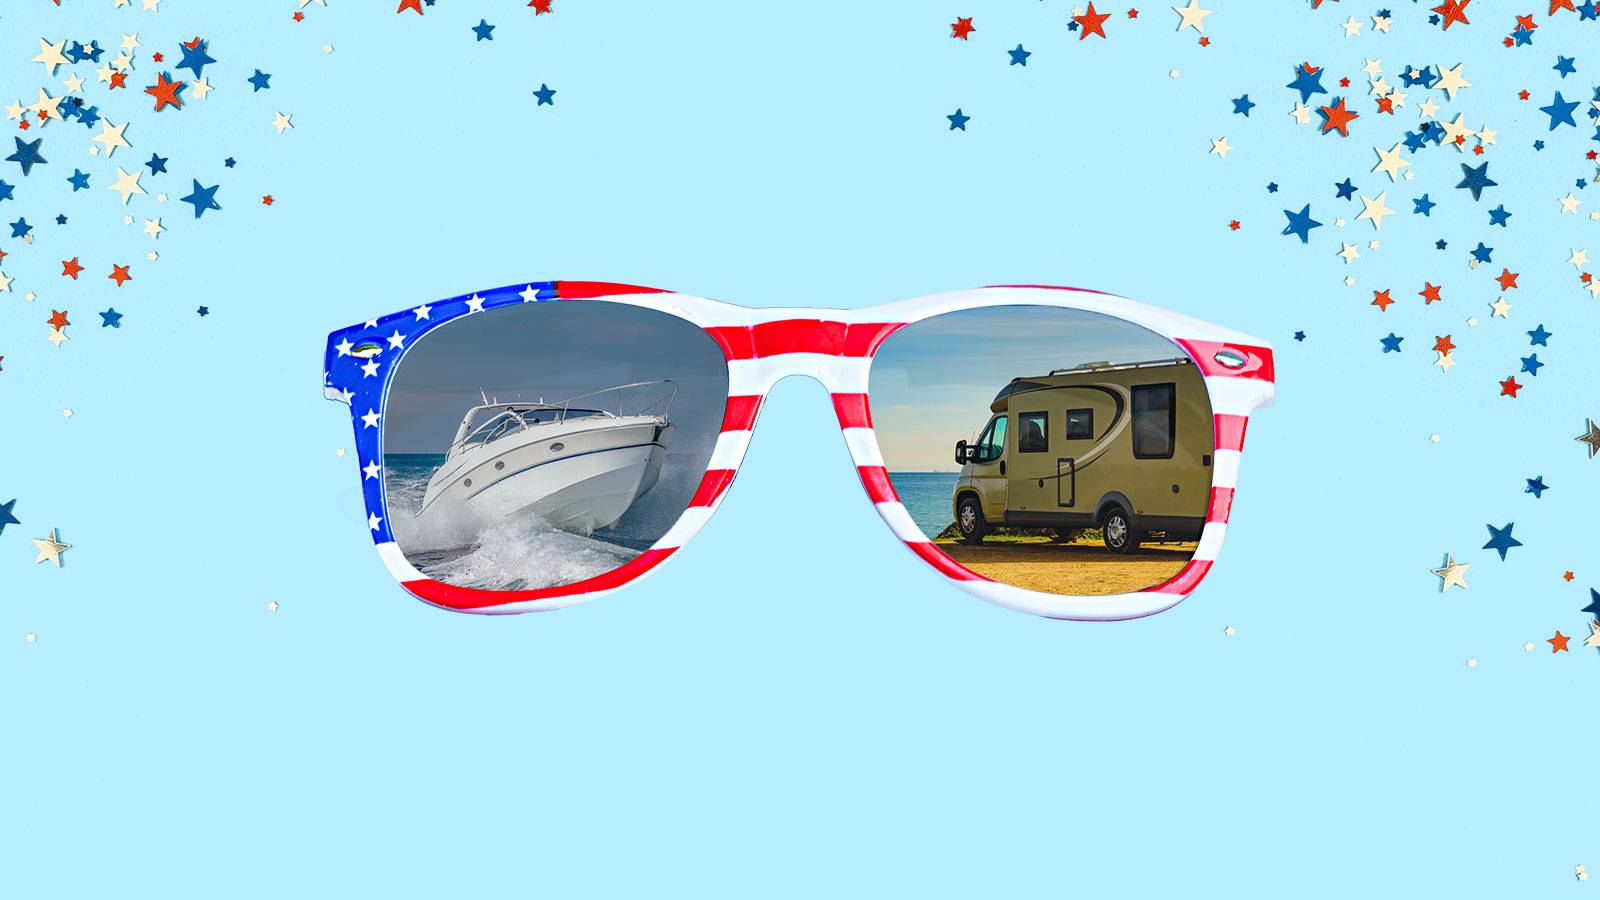 Boat and RV Loans